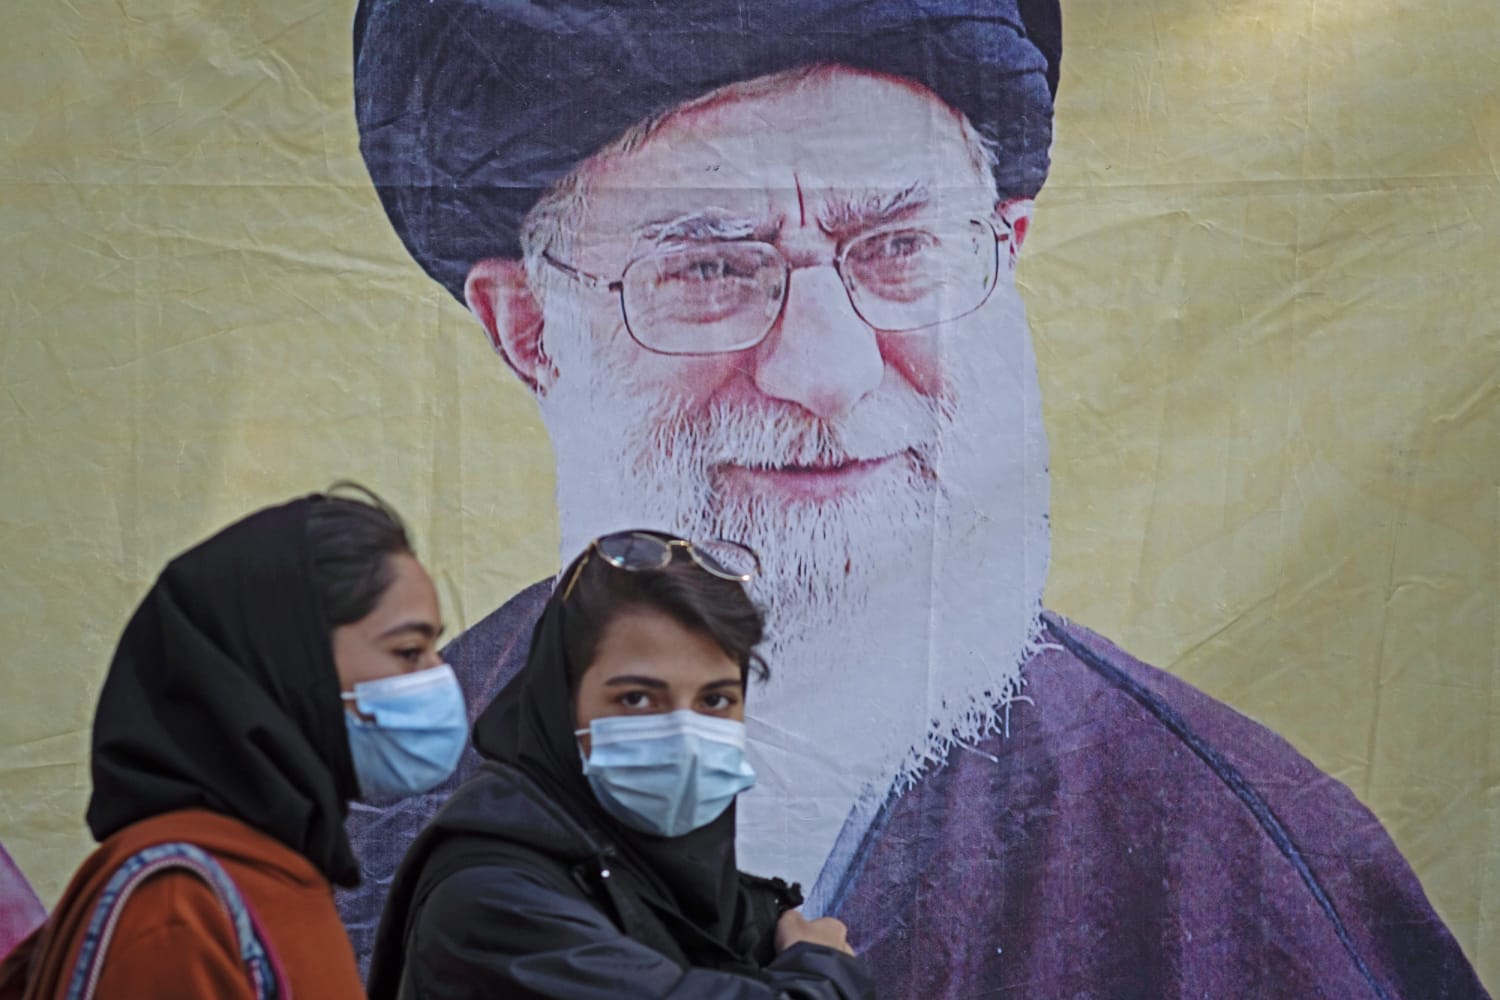 Iran's supreme leader hints at loosening hijab rules after months of protests over young woman's death